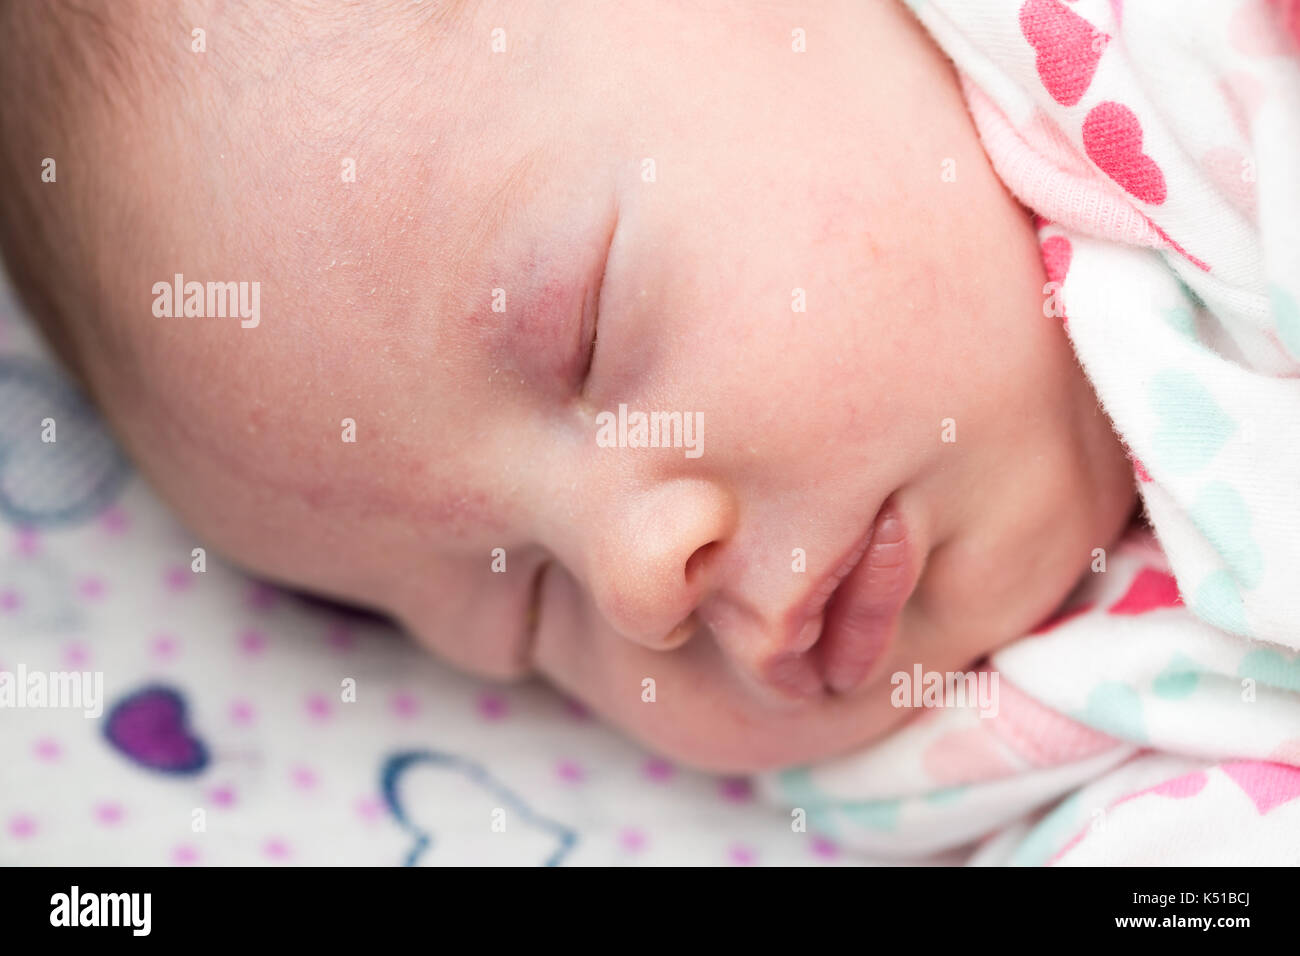 Closeup of a newborn baby sleeping in the crib, stork bite on forehead and eyelid Stock Photo